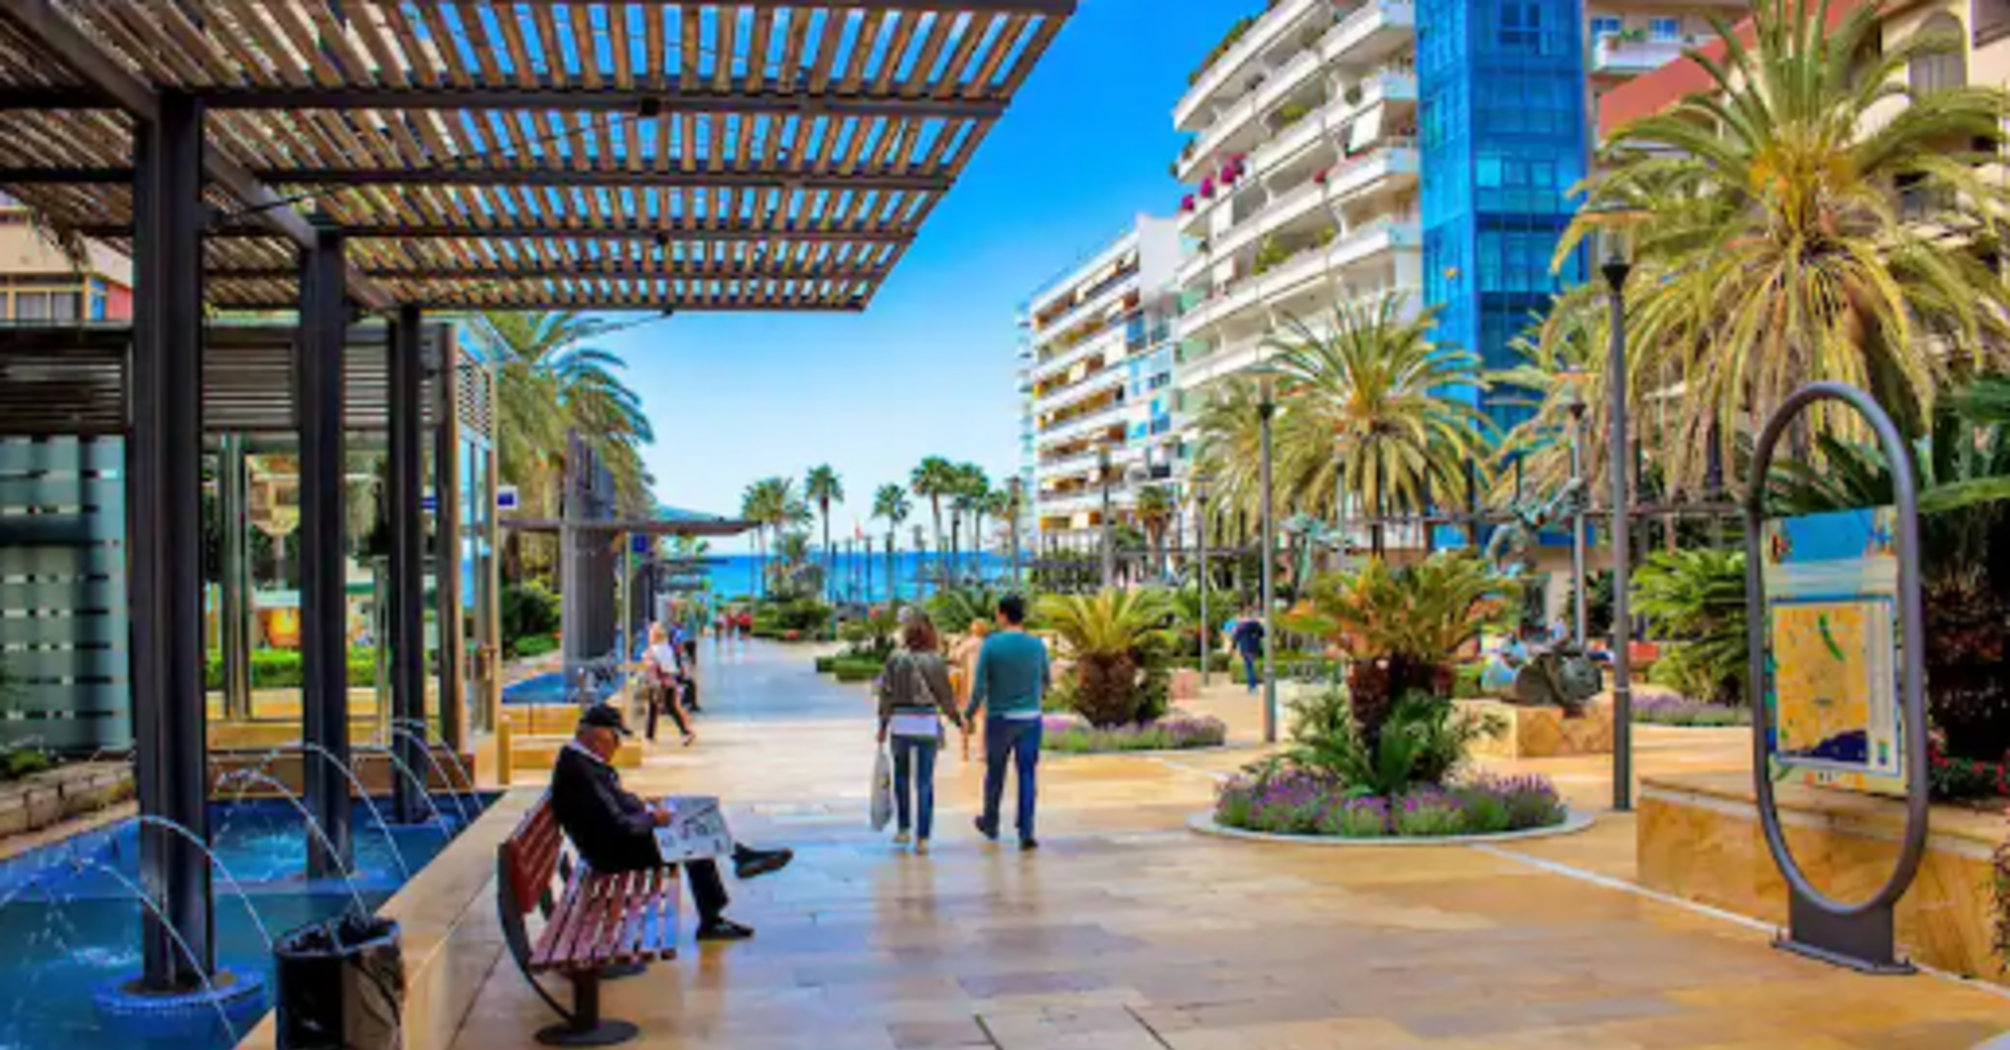 Costa del Sol hotels expect 78.5% occupancy for Easter week